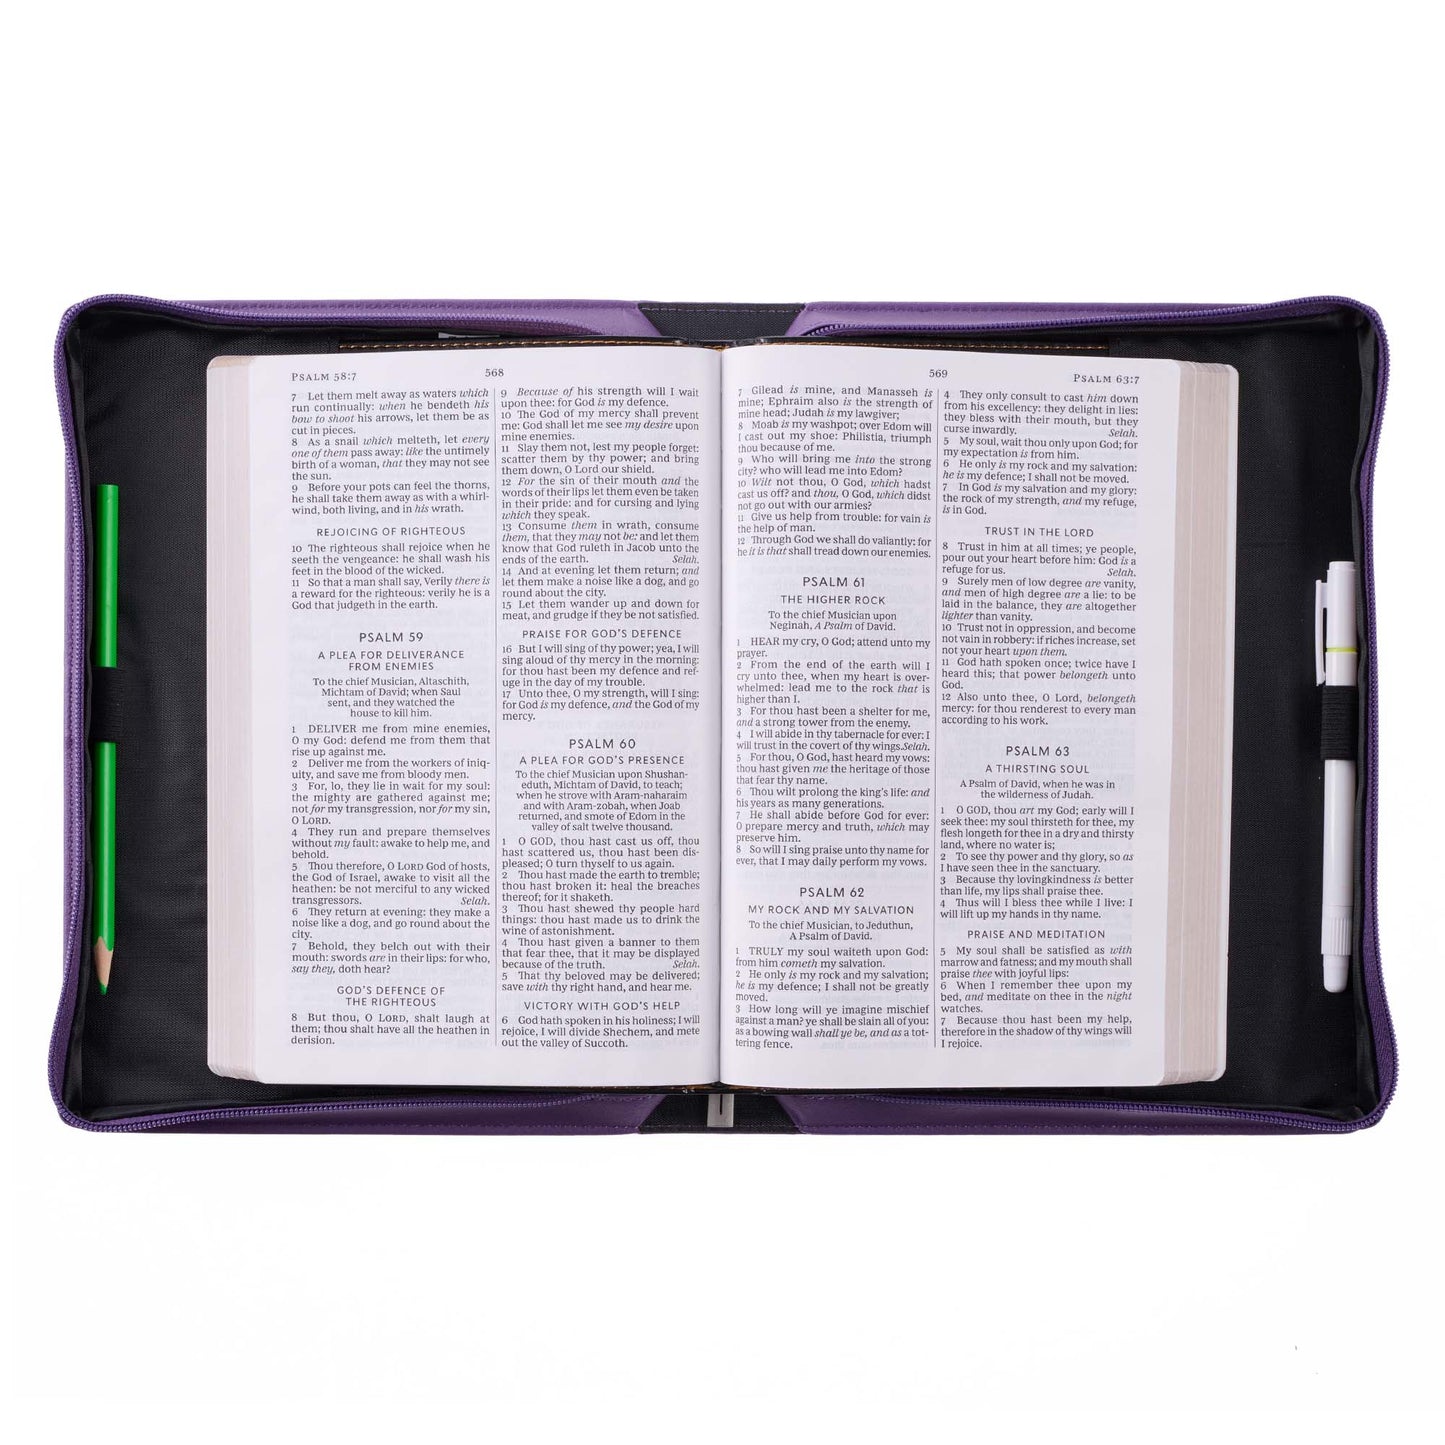 Purple Floral Blessed Is The One Faux Leather Fashion Bible Cover - Jeremiah 17:7 - The Christian Gift Company